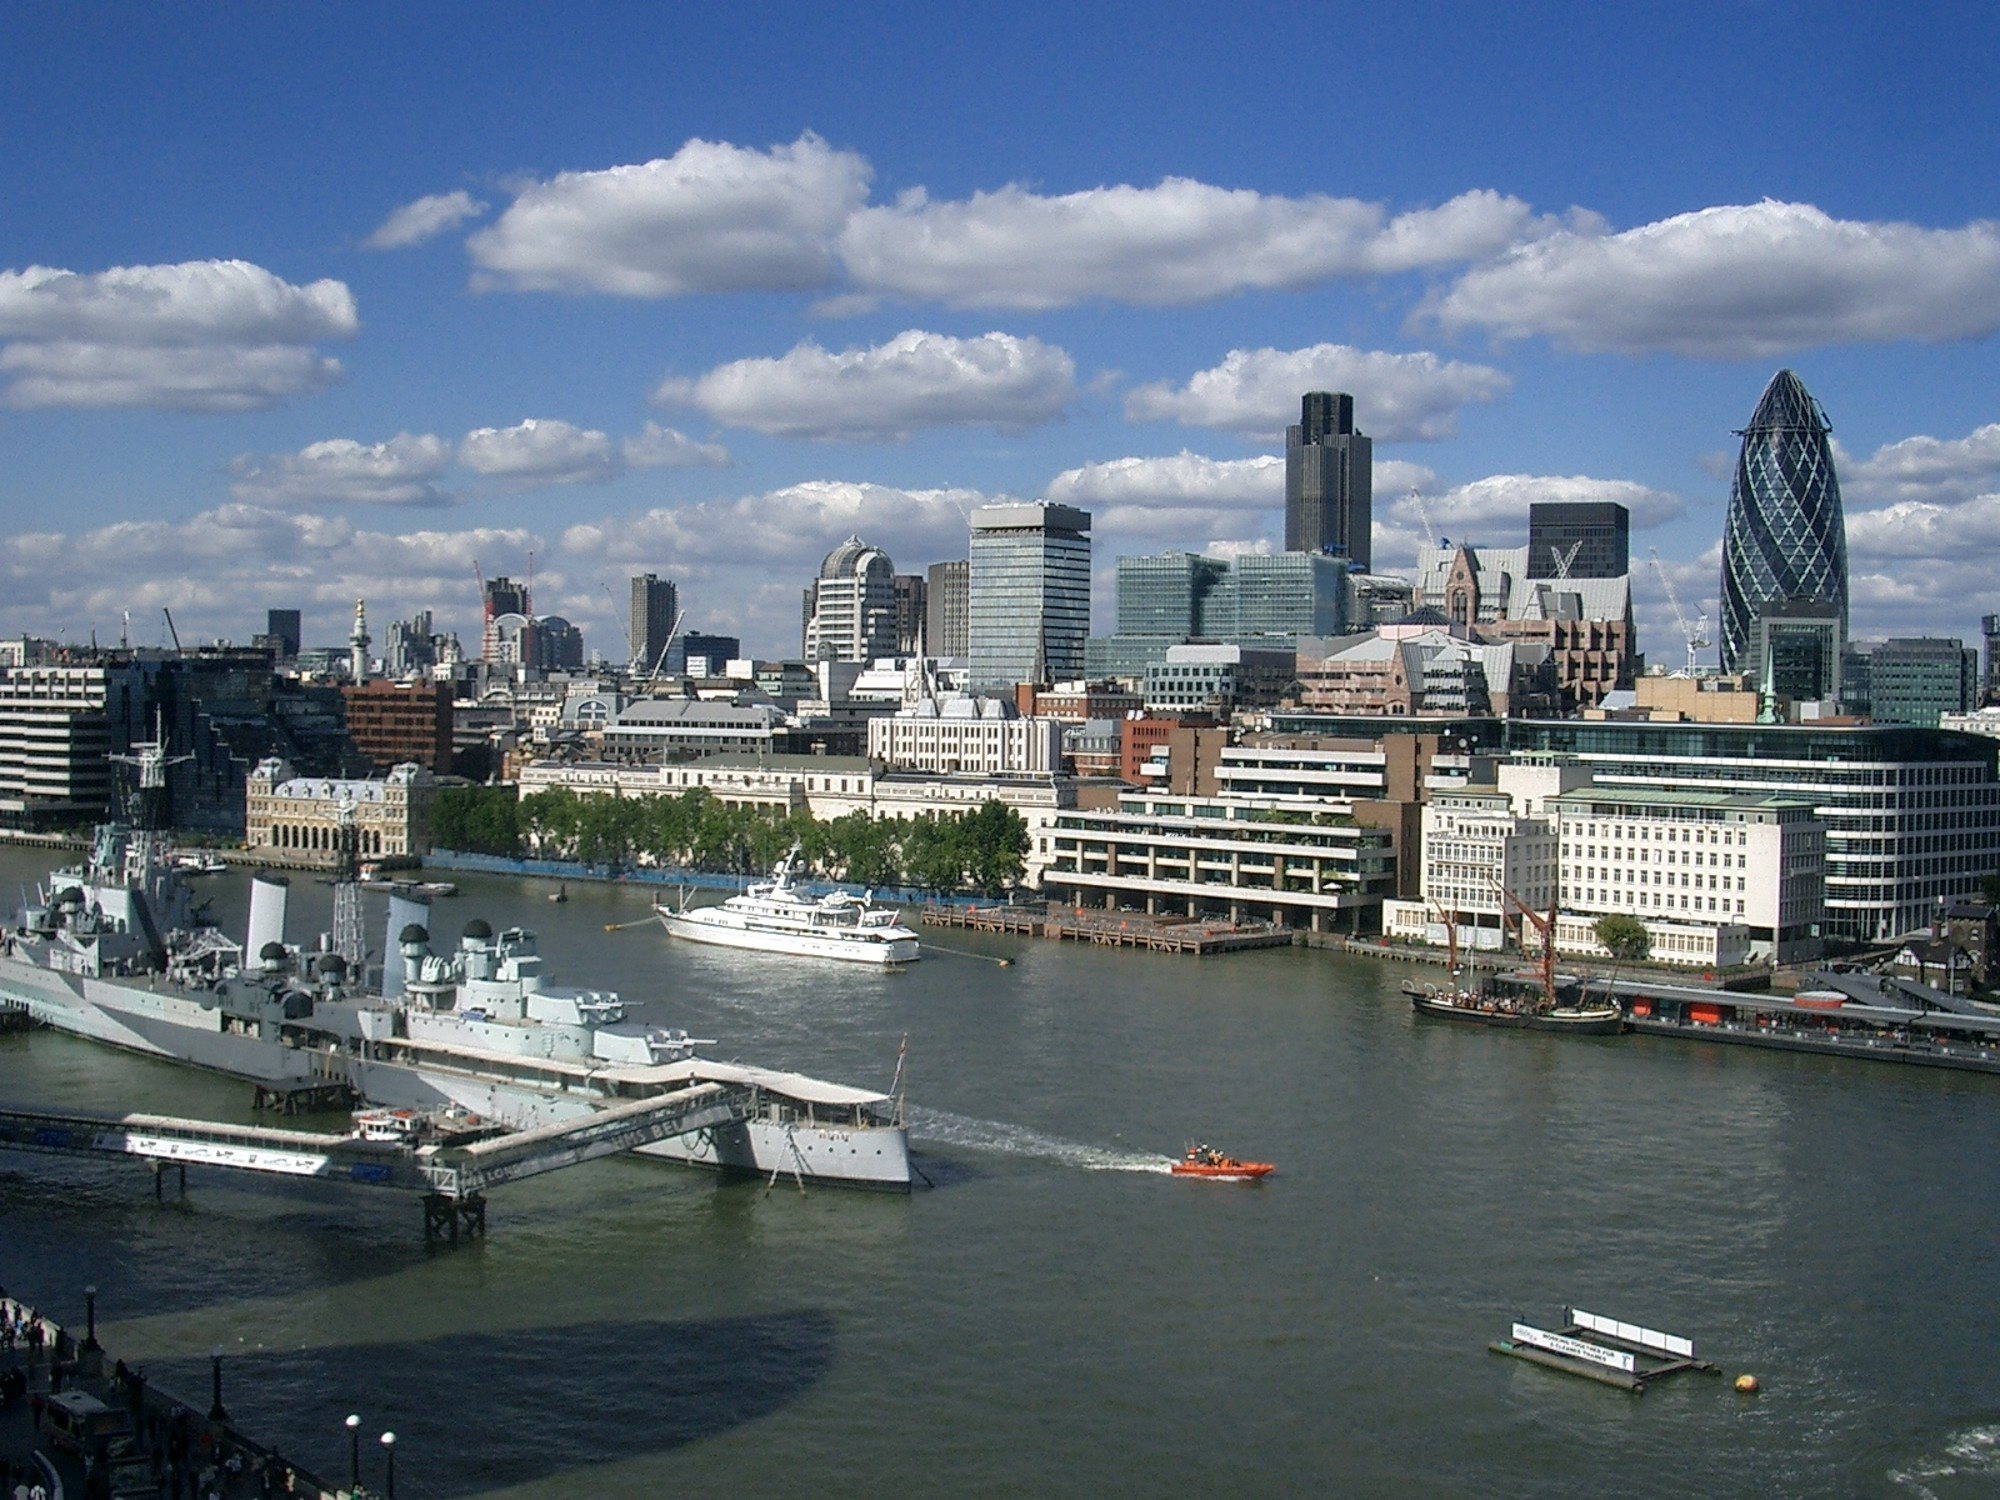 Skyline of London with the river Thames in foreground